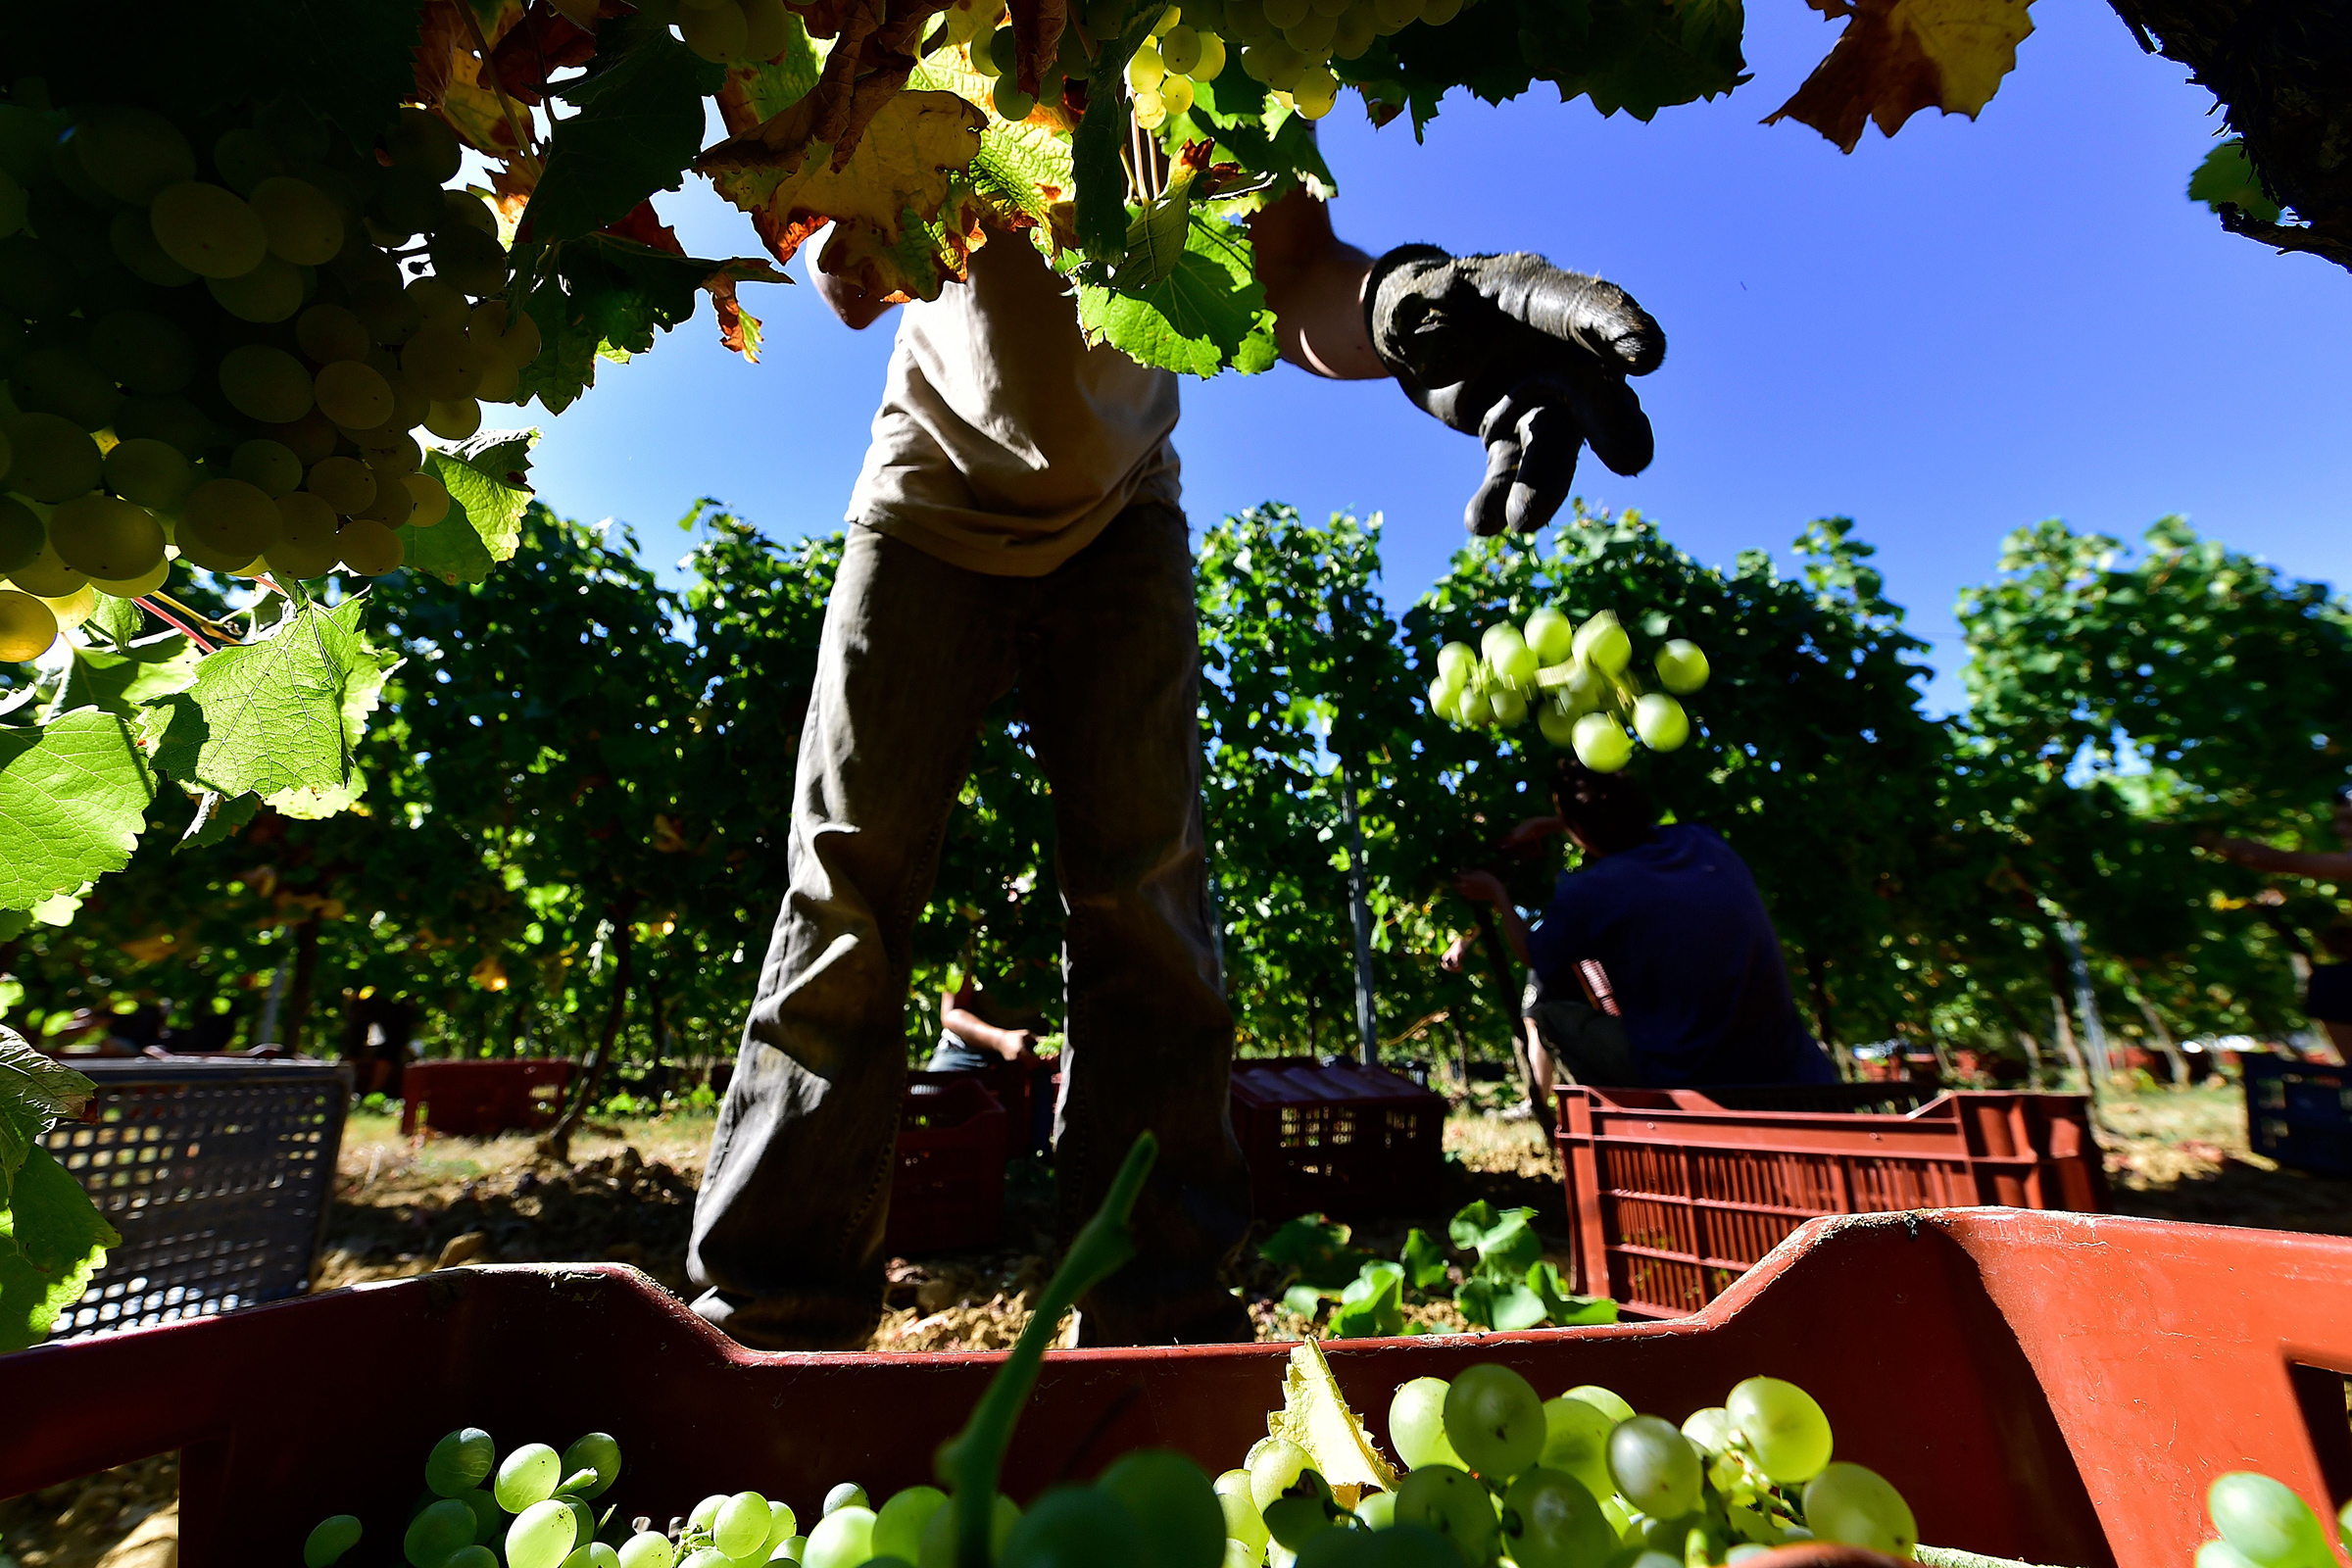 Workers collect grapes on Sept. 3, 2019 in a vineyard near Rauzan in the Entre-Deux-Mers region near Bordeaux, southwestern France (Georges Gobet—AFP/Getty Images)